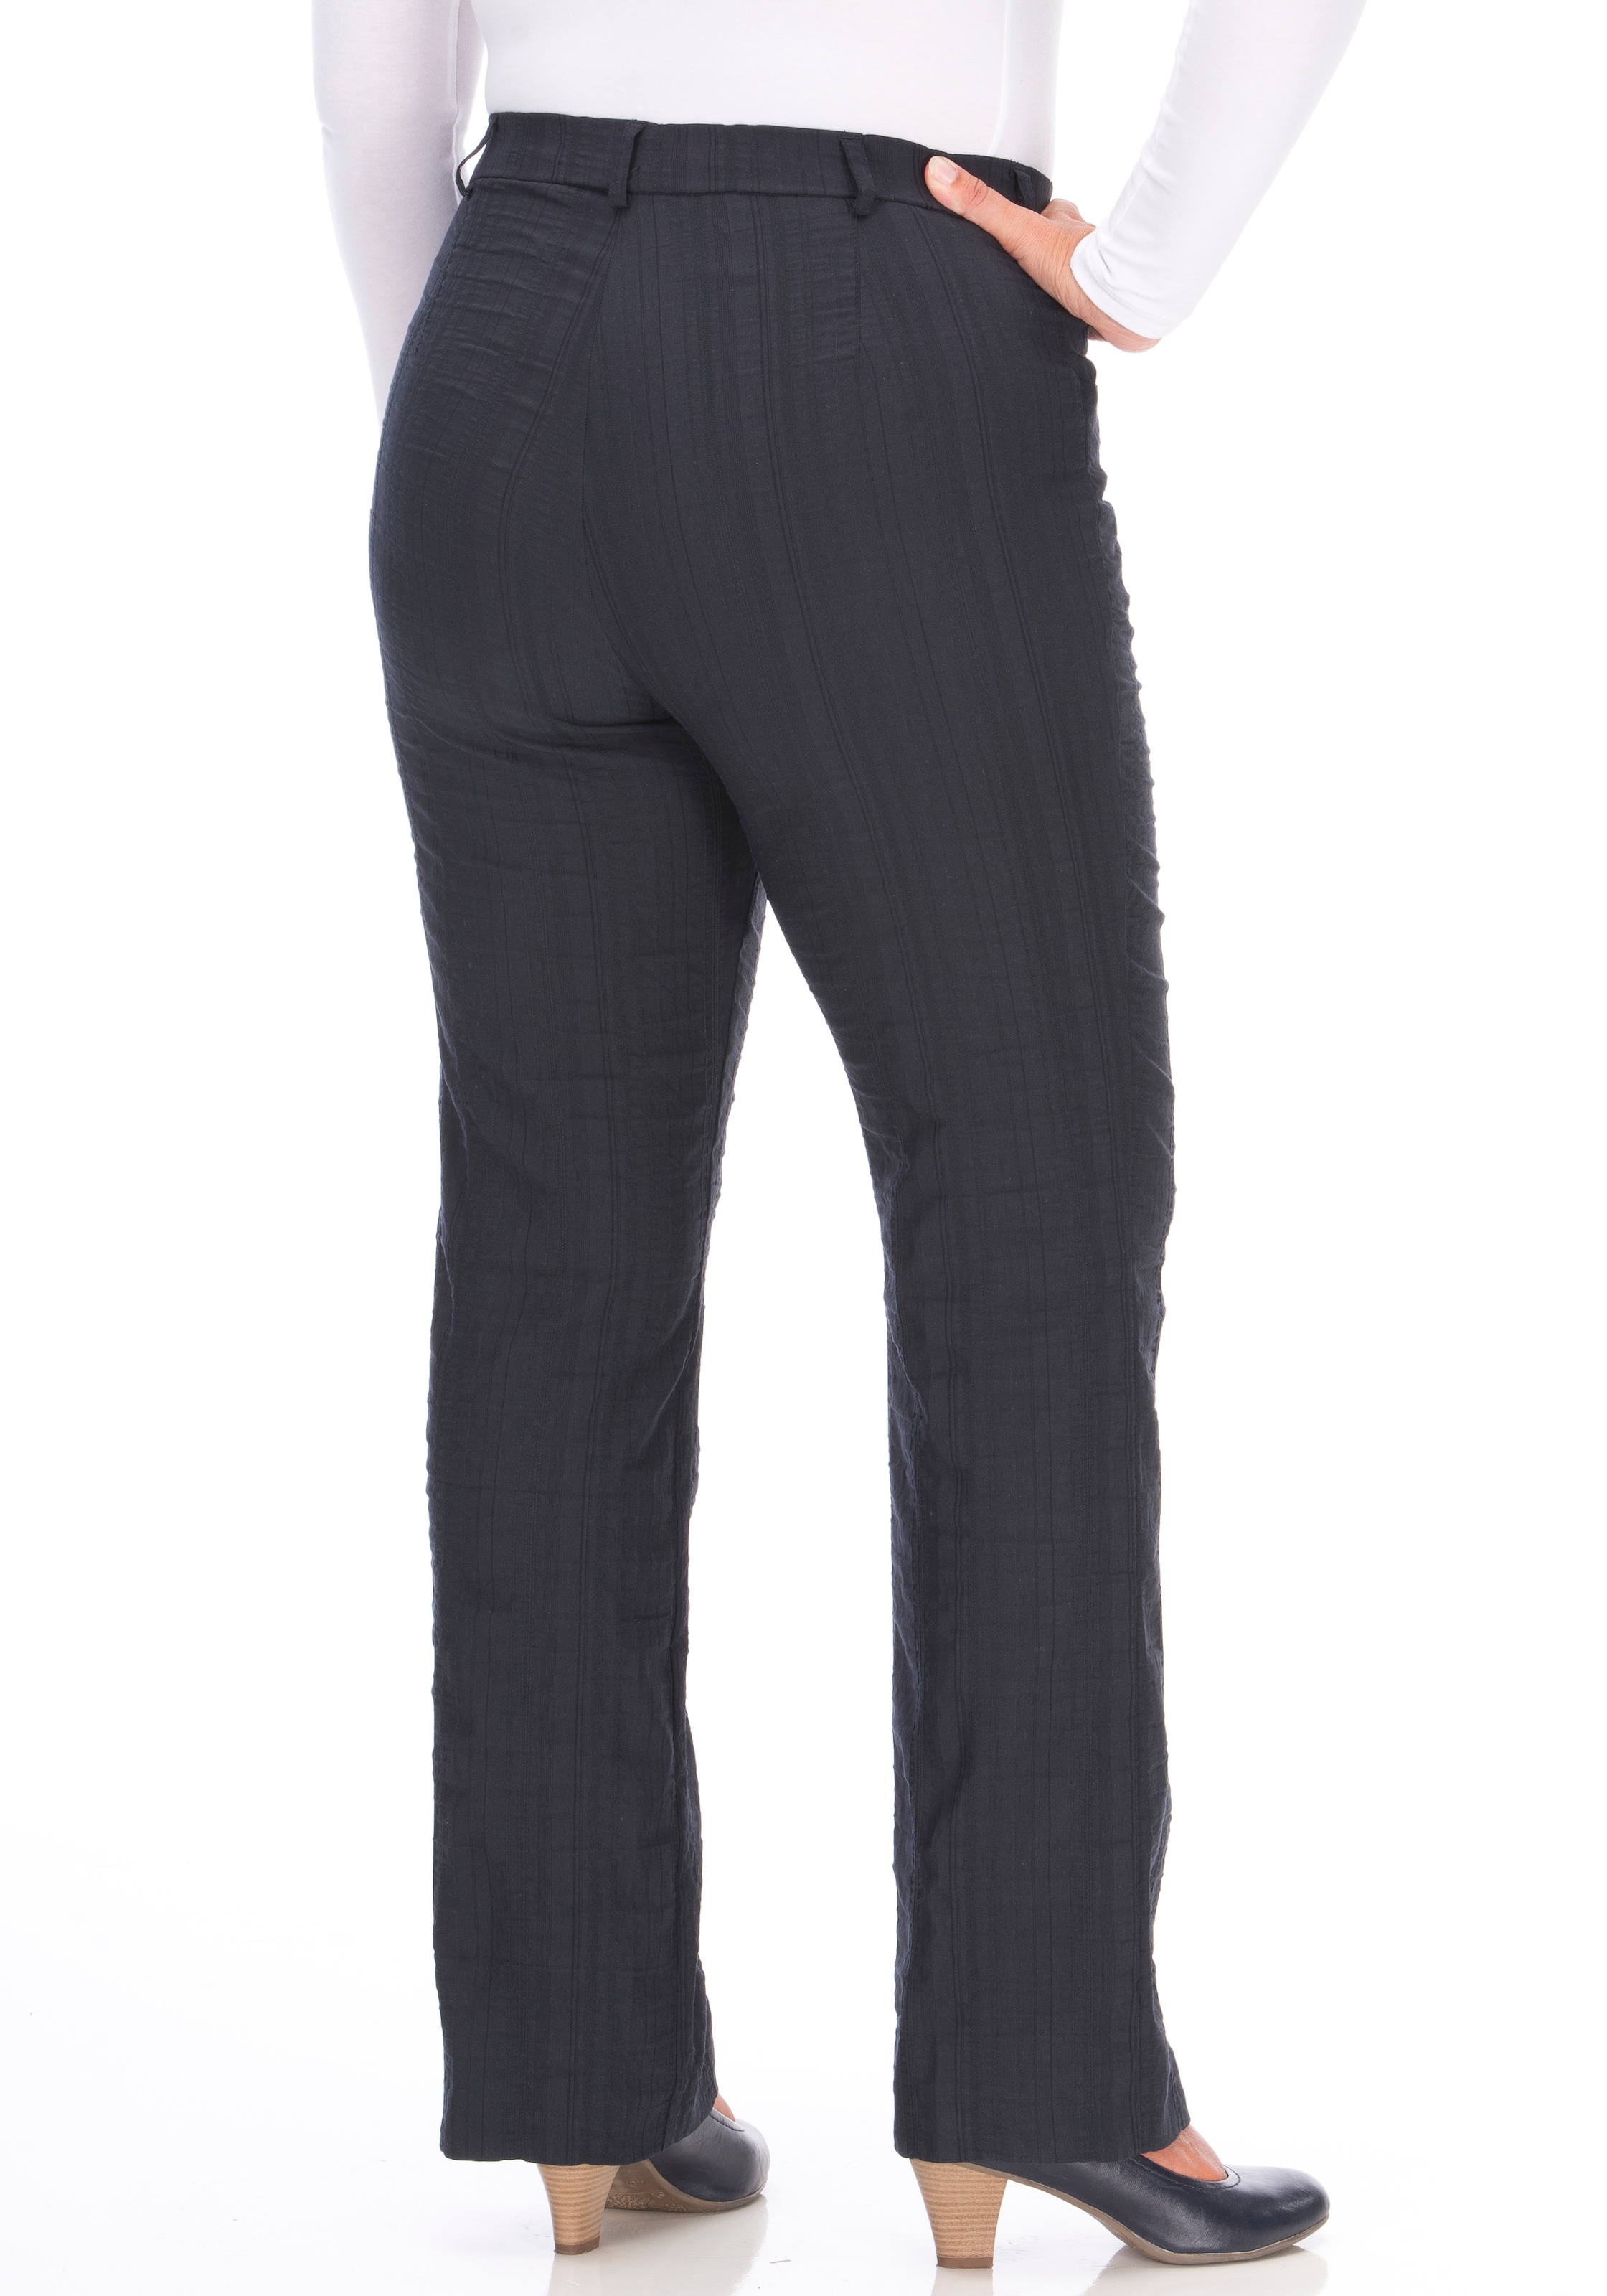 optimale in bei ♕ KjBRAND Quer-Stretch Stoffhose Passform »Bea«,